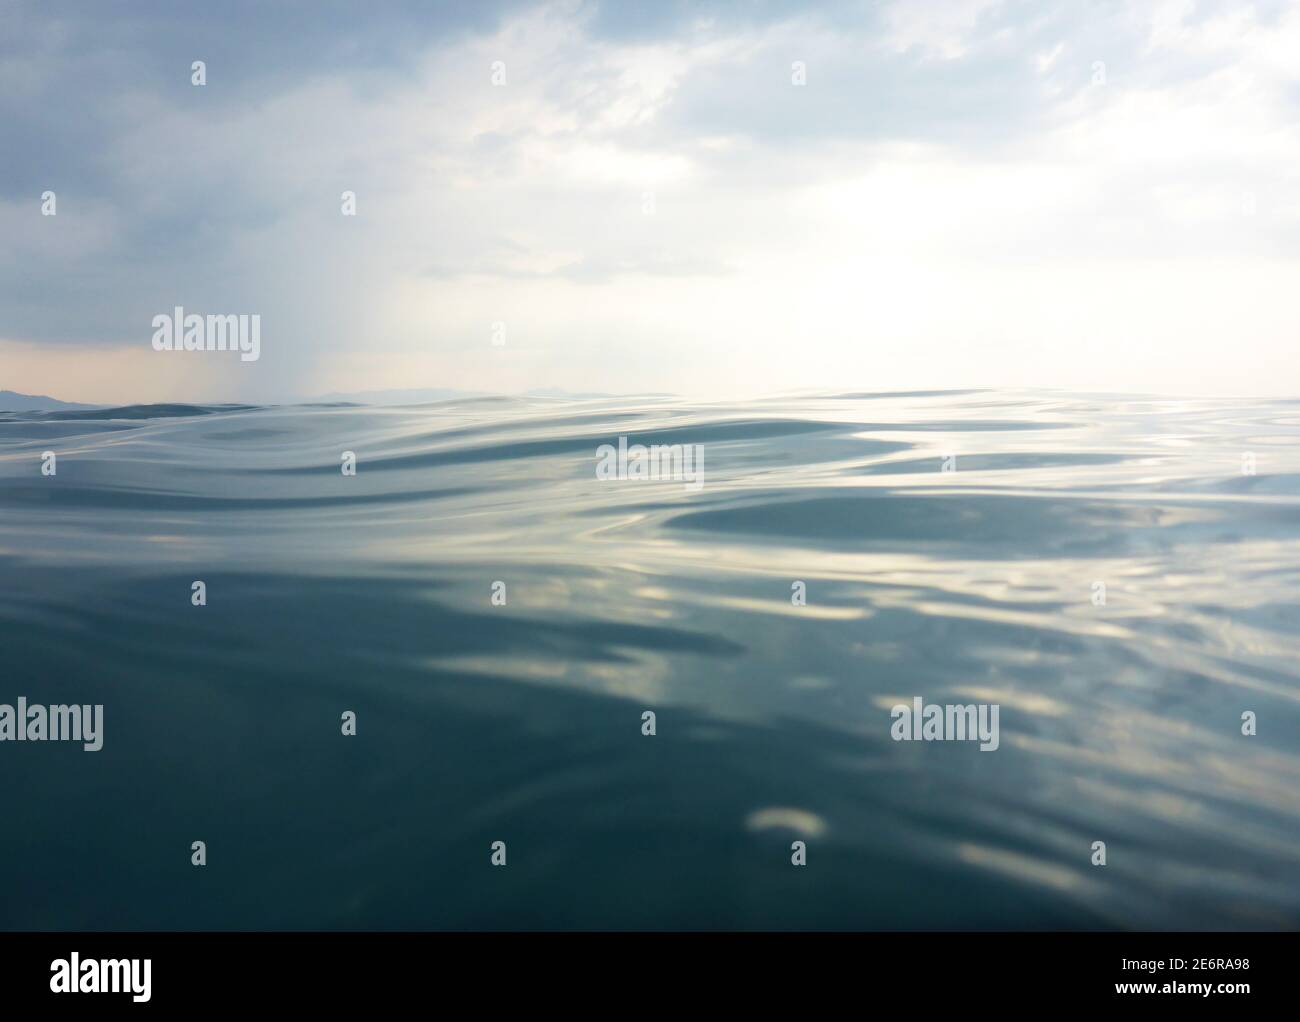 Background texture of clear, blue sea at water level and a cloudy evening sky Stock Photo